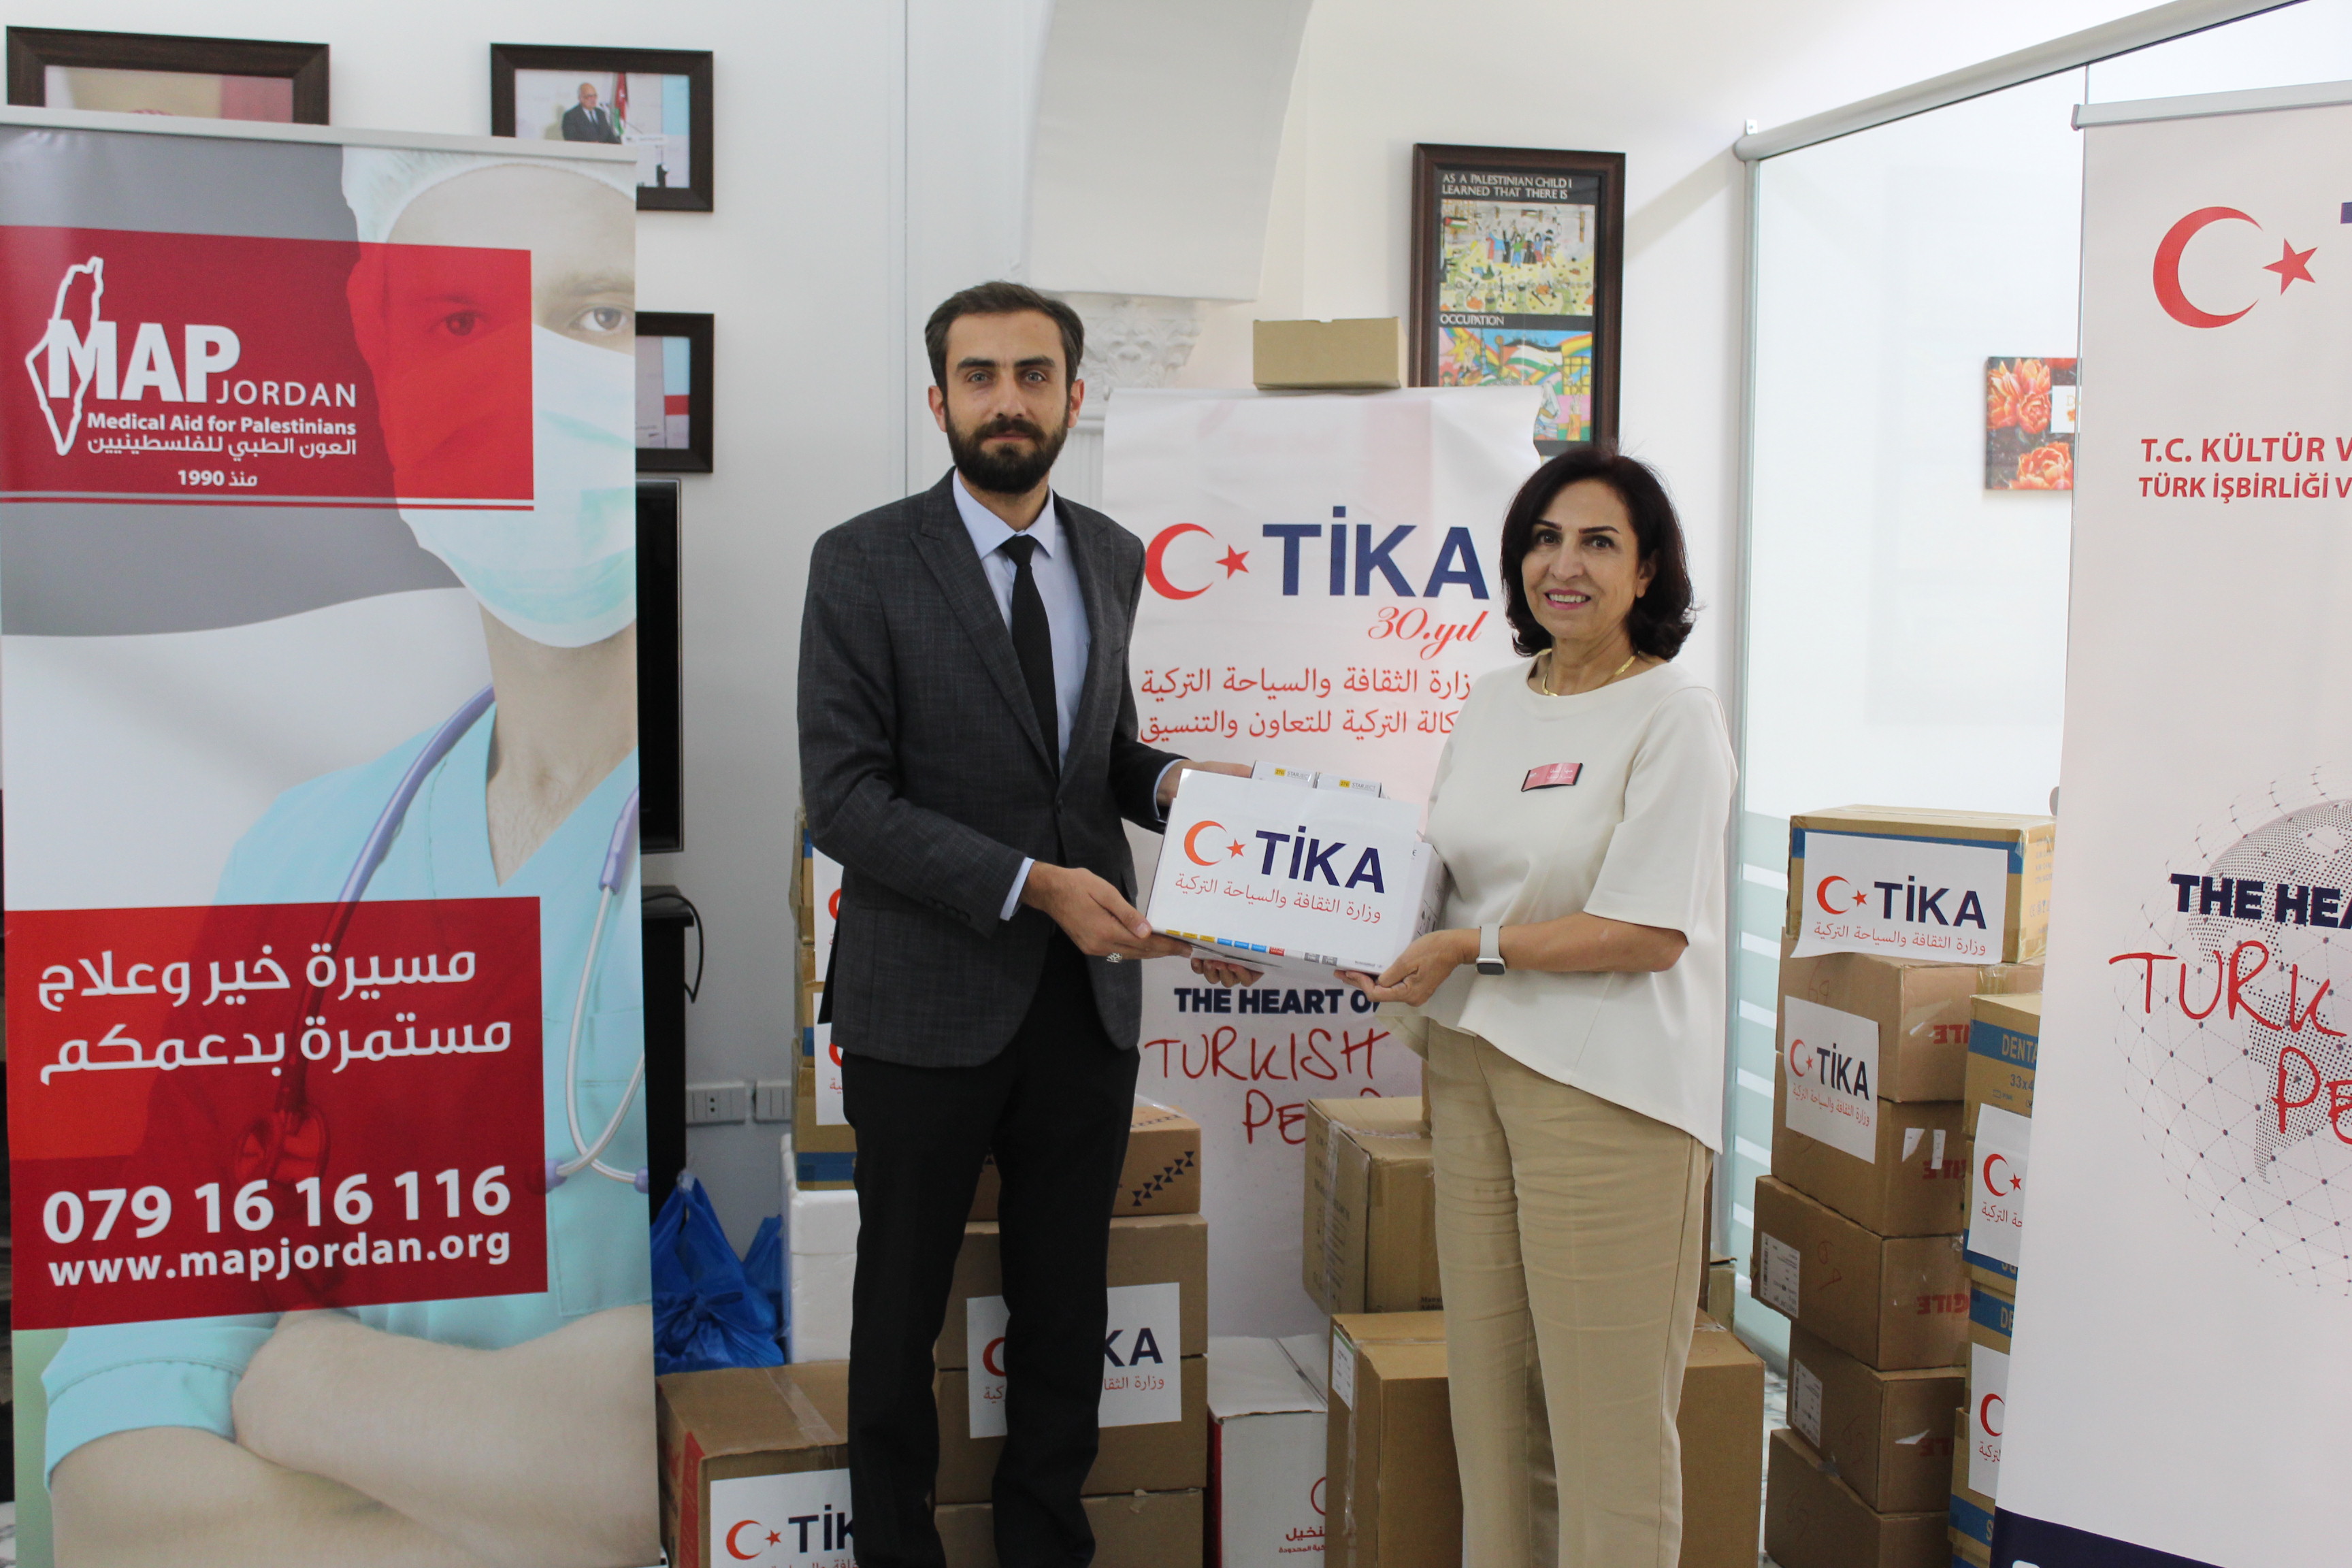 The Turkish Cooperation and Coordination Agency supports MAP Jordan’s medical centers